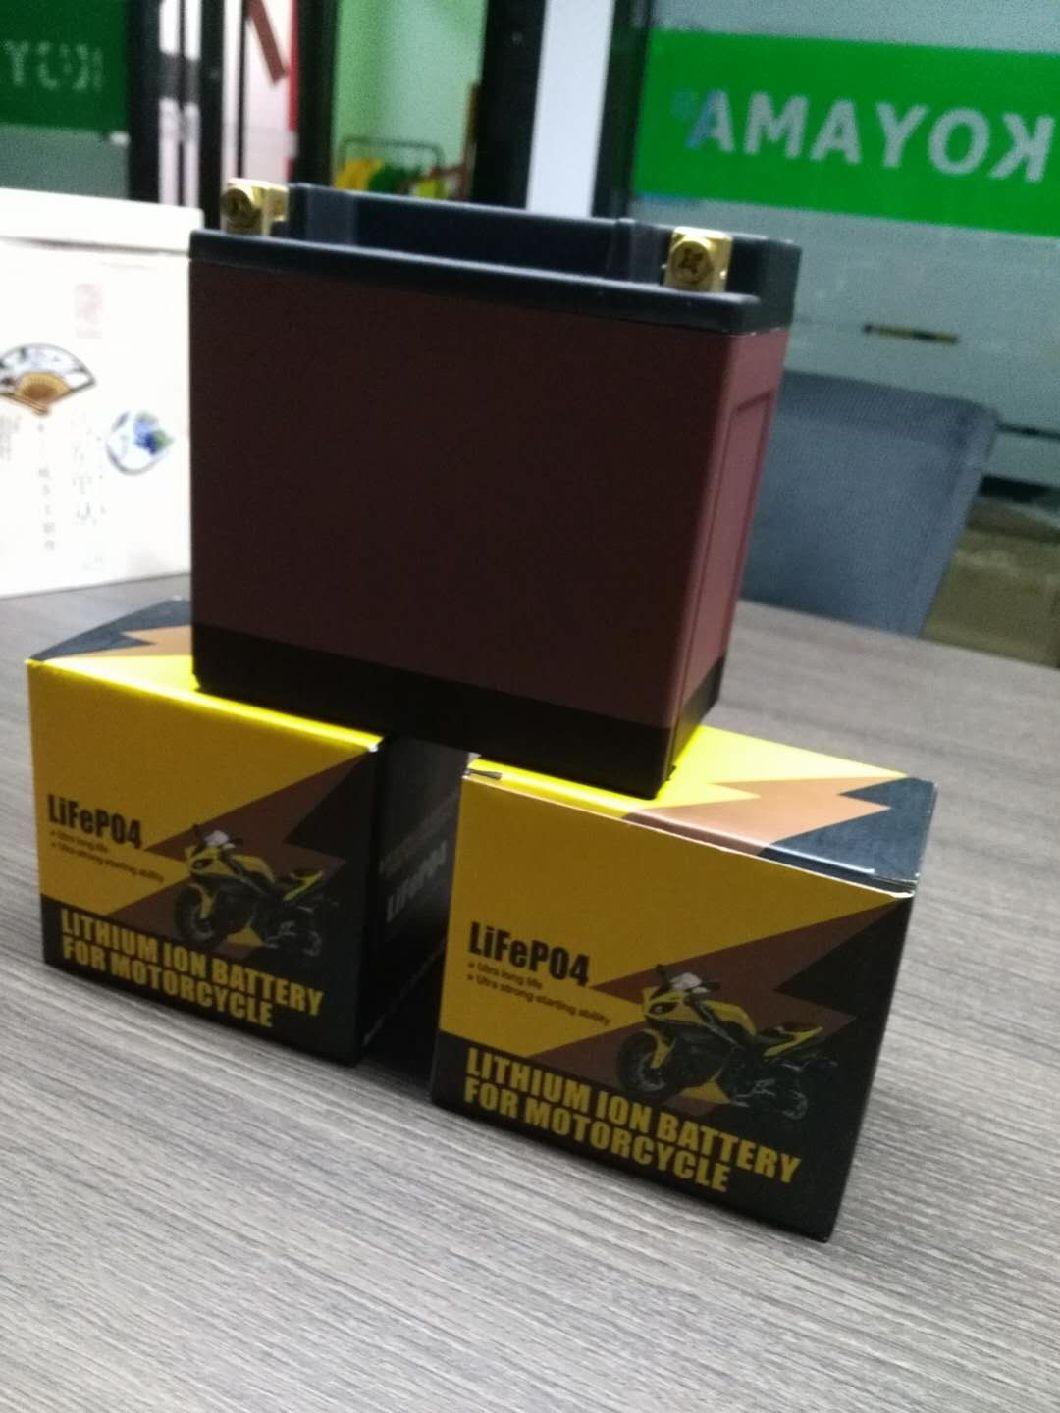 Storage Lithium Ion Motorcycle Battery LFP7-a Battery Motorcycle